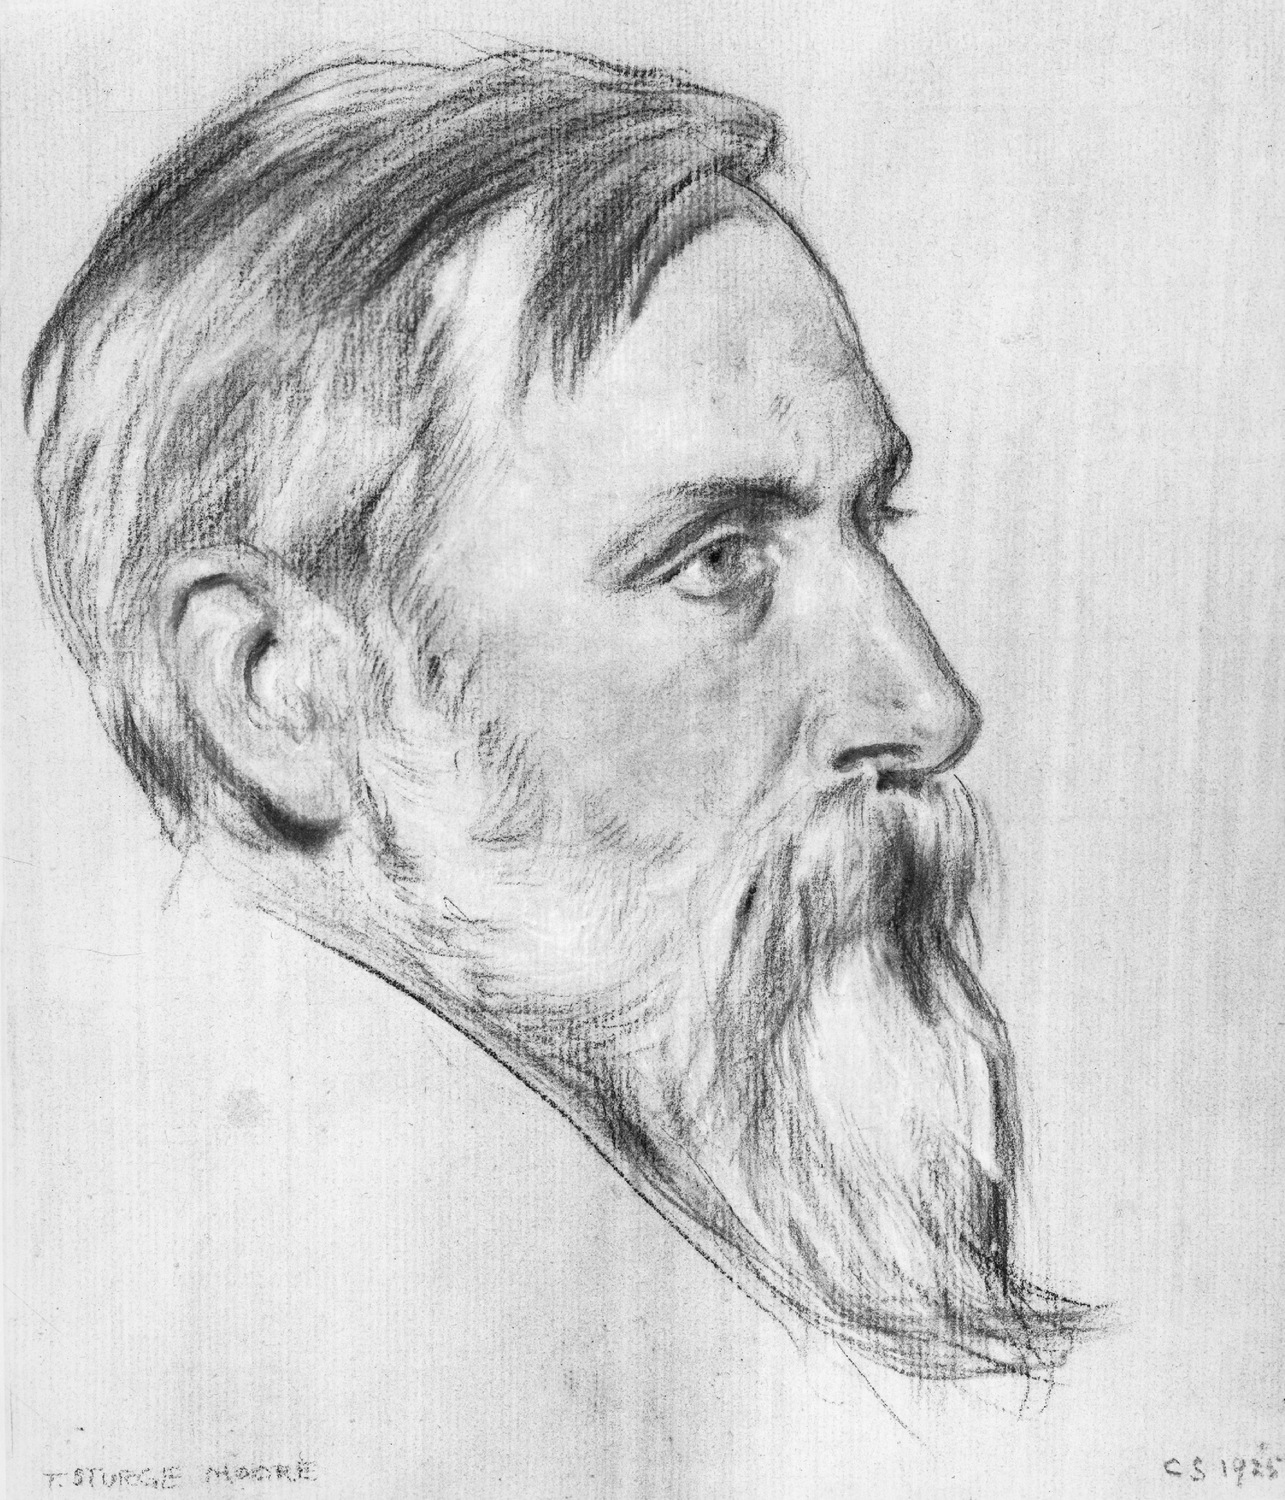 Thomas Sturge Moore is shown in right profile gazing forward. His head, located in the dominant foreground of the portrait, is angled slightly to the right so that the outline of his left eyebrow and eye are visible. His hair is parted on the left and sweeping over to the right side of his face, casting a light shadow on his forehead. His hair line blends into his heavy moustache and long beard which protrudes downward and covers his neck. Sturge’s shoulders are not depicted, but he appears to be wearing a white collared shirt. The portrait is shaded in light and dark grey tones. “T. Sturge Moore” is written in small capitalized letters on the bottom left of the image, and “CS 1925” is signed on the bottom right.